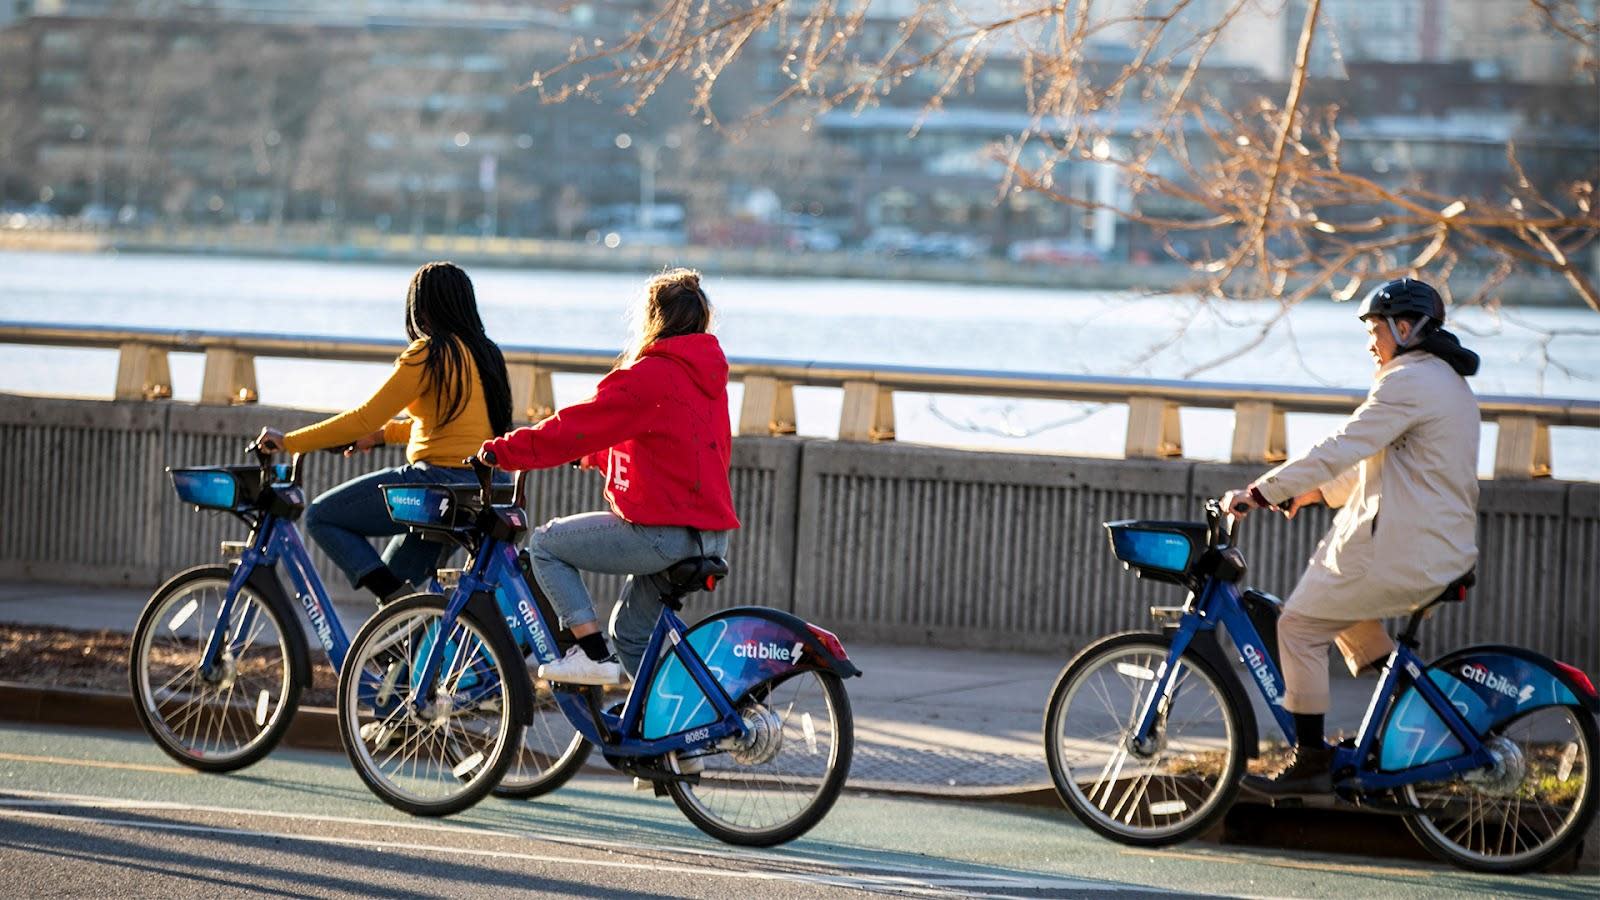 Photograph of three cyclist riding Citibike bike-bikes on a bike path along the Hudson River in New York City.